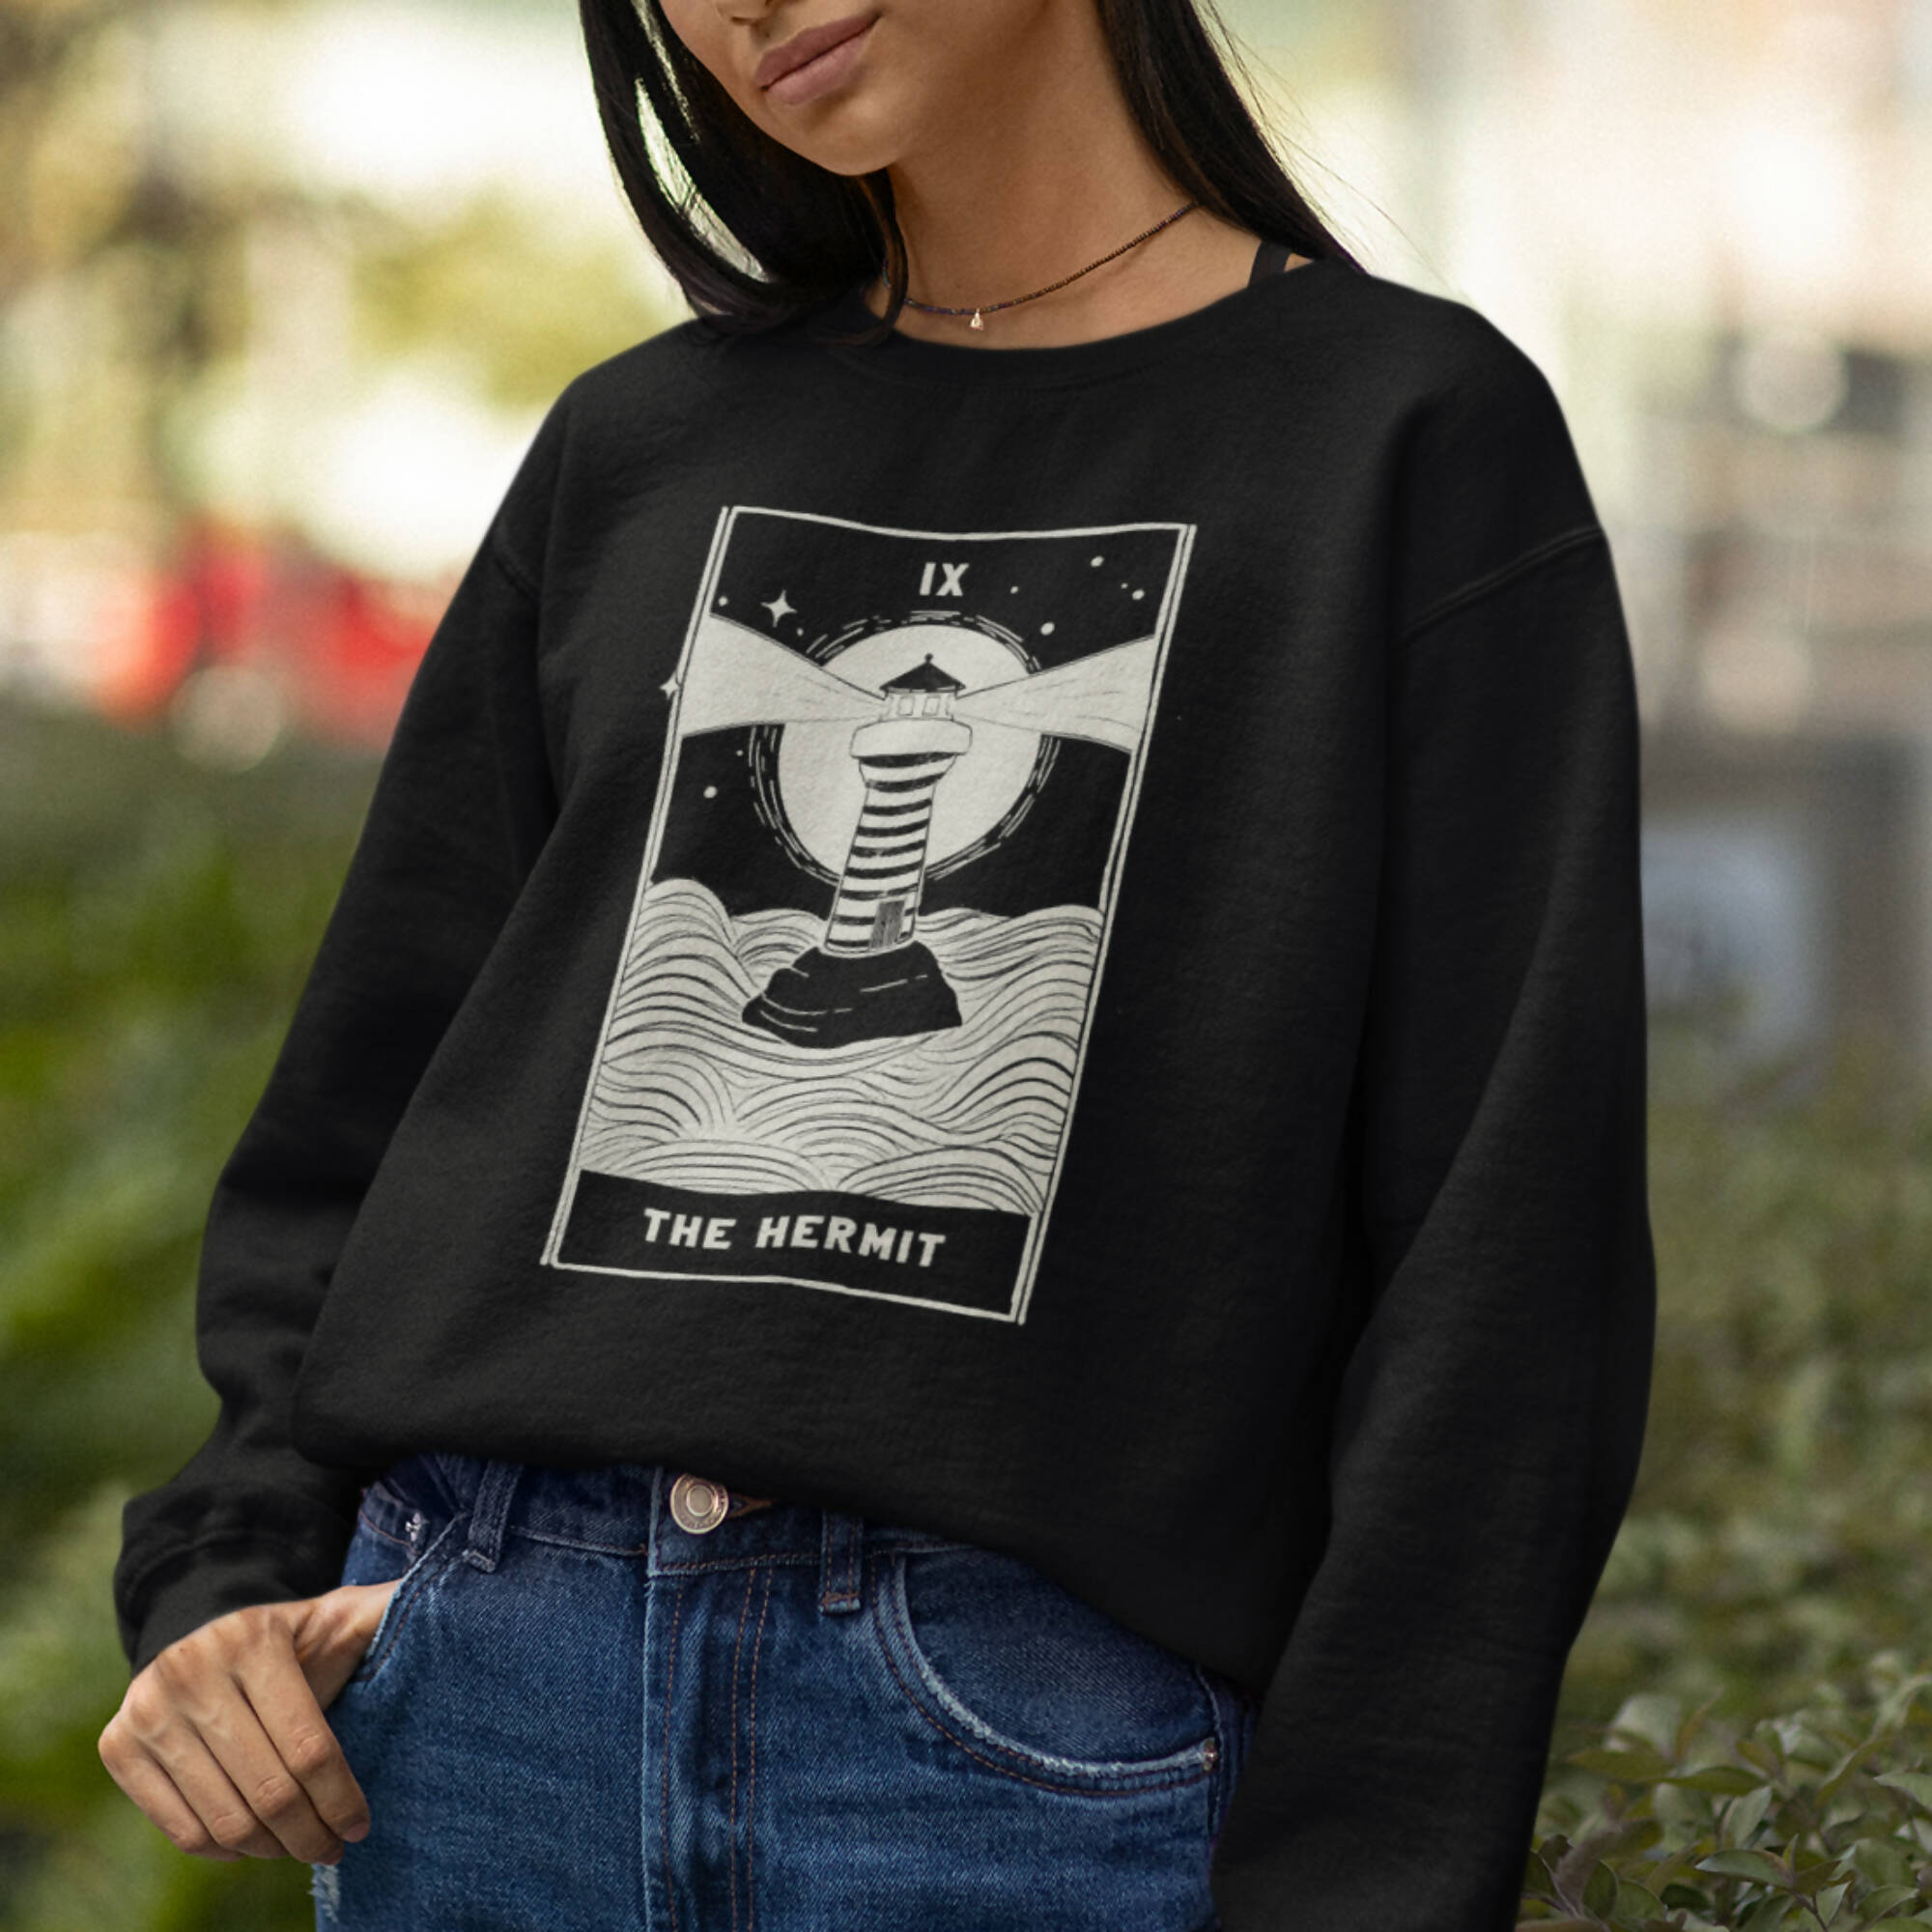 "The Hermit" Hand-Drawn Tarot Sweatshirt (Made on demand. Delivered free within 2 weeks)